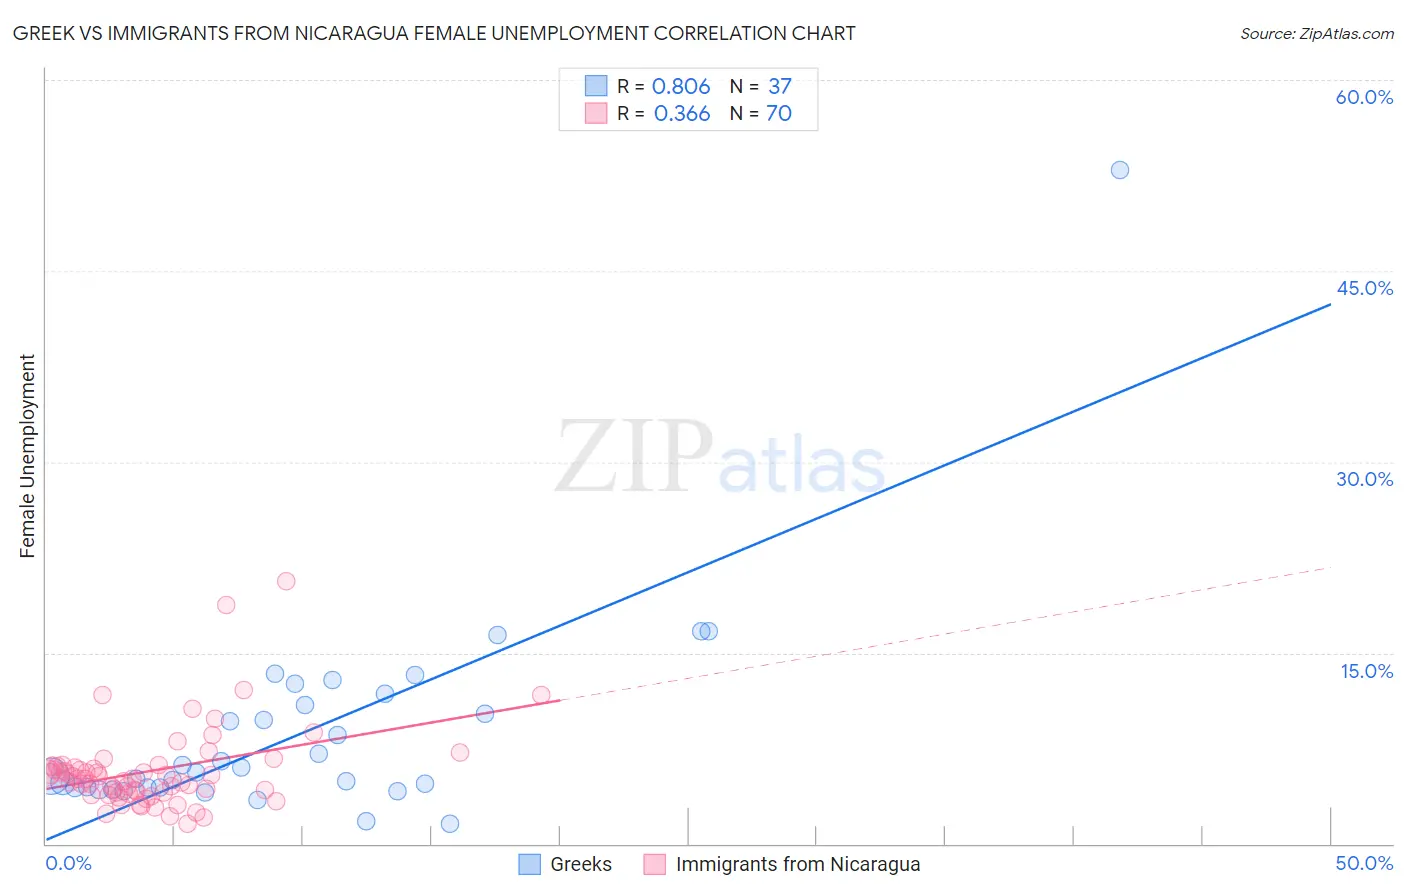 Greek vs Immigrants from Nicaragua Female Unemployment